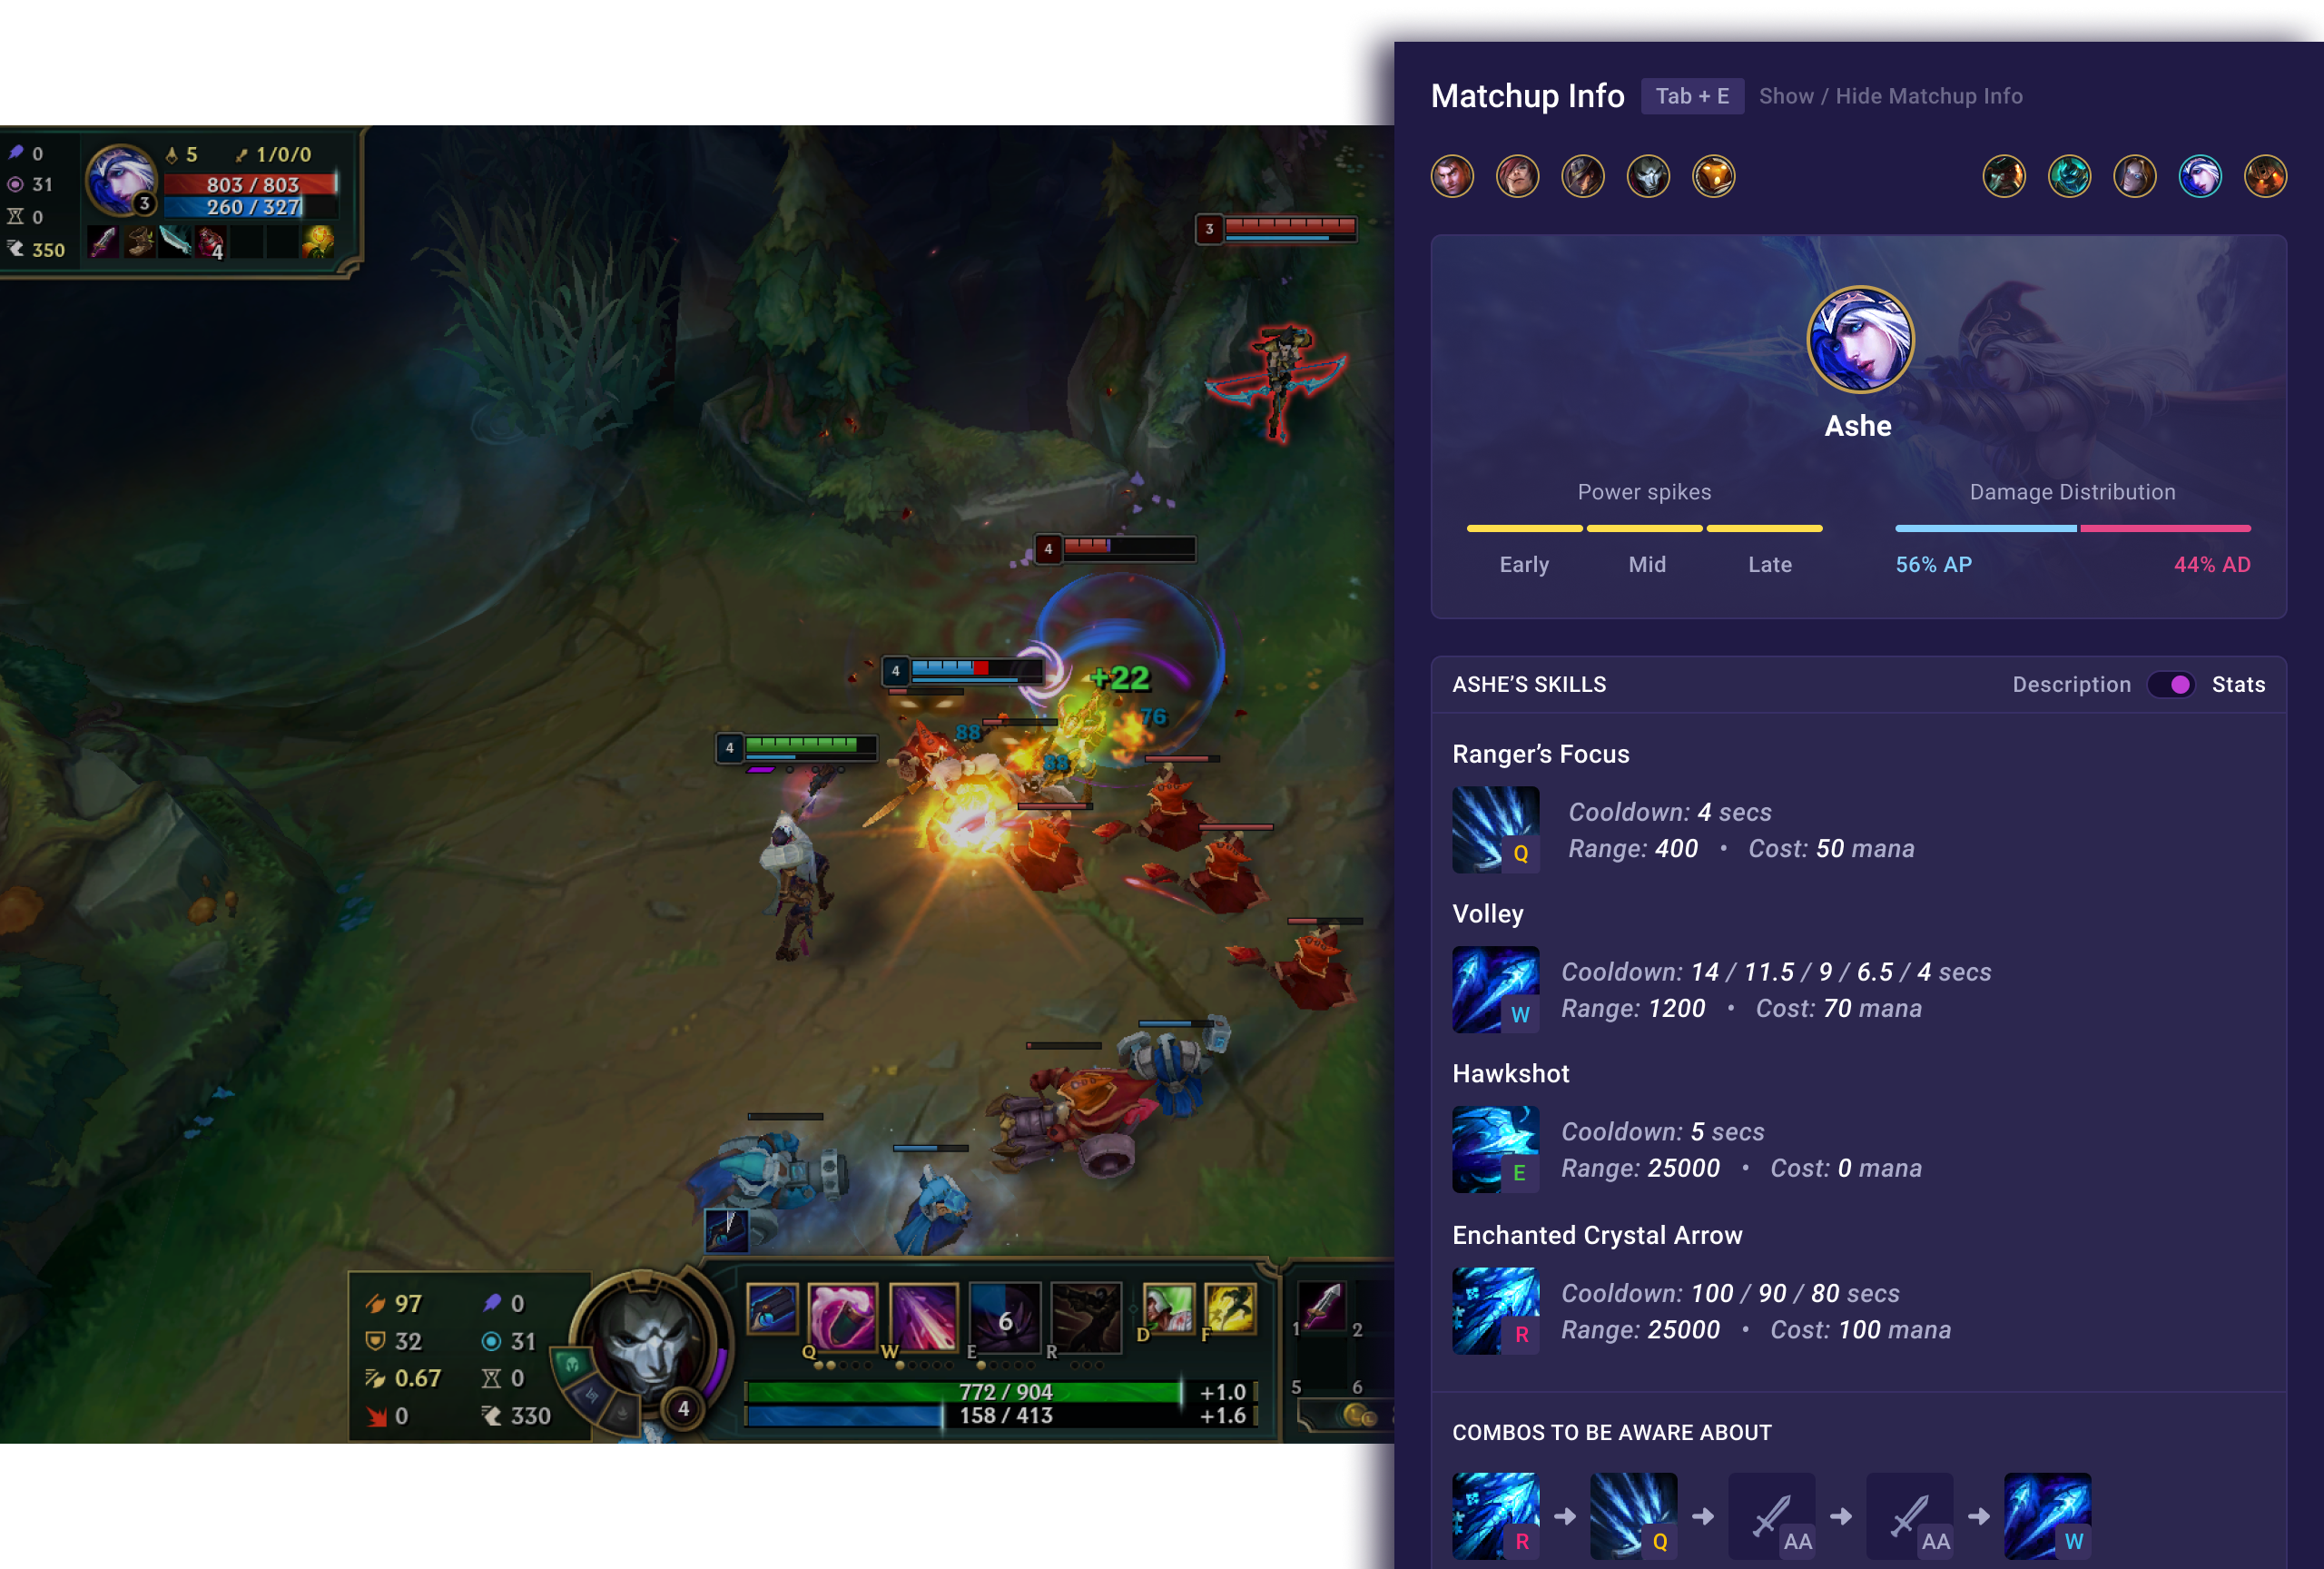 How to Use the Mobalytics Overlay + Live Companion for League of